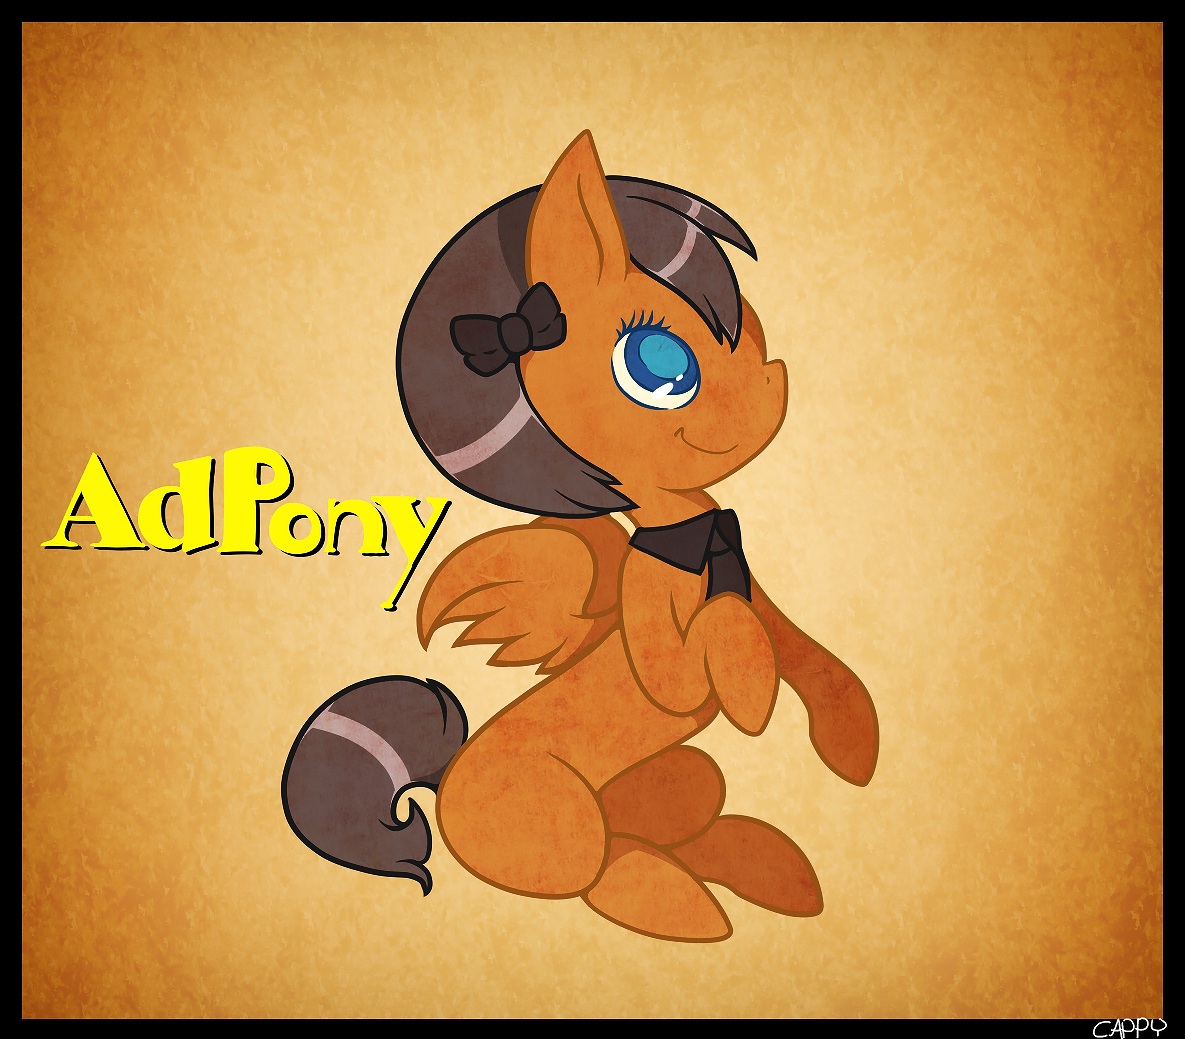 AdPony by cottonboon